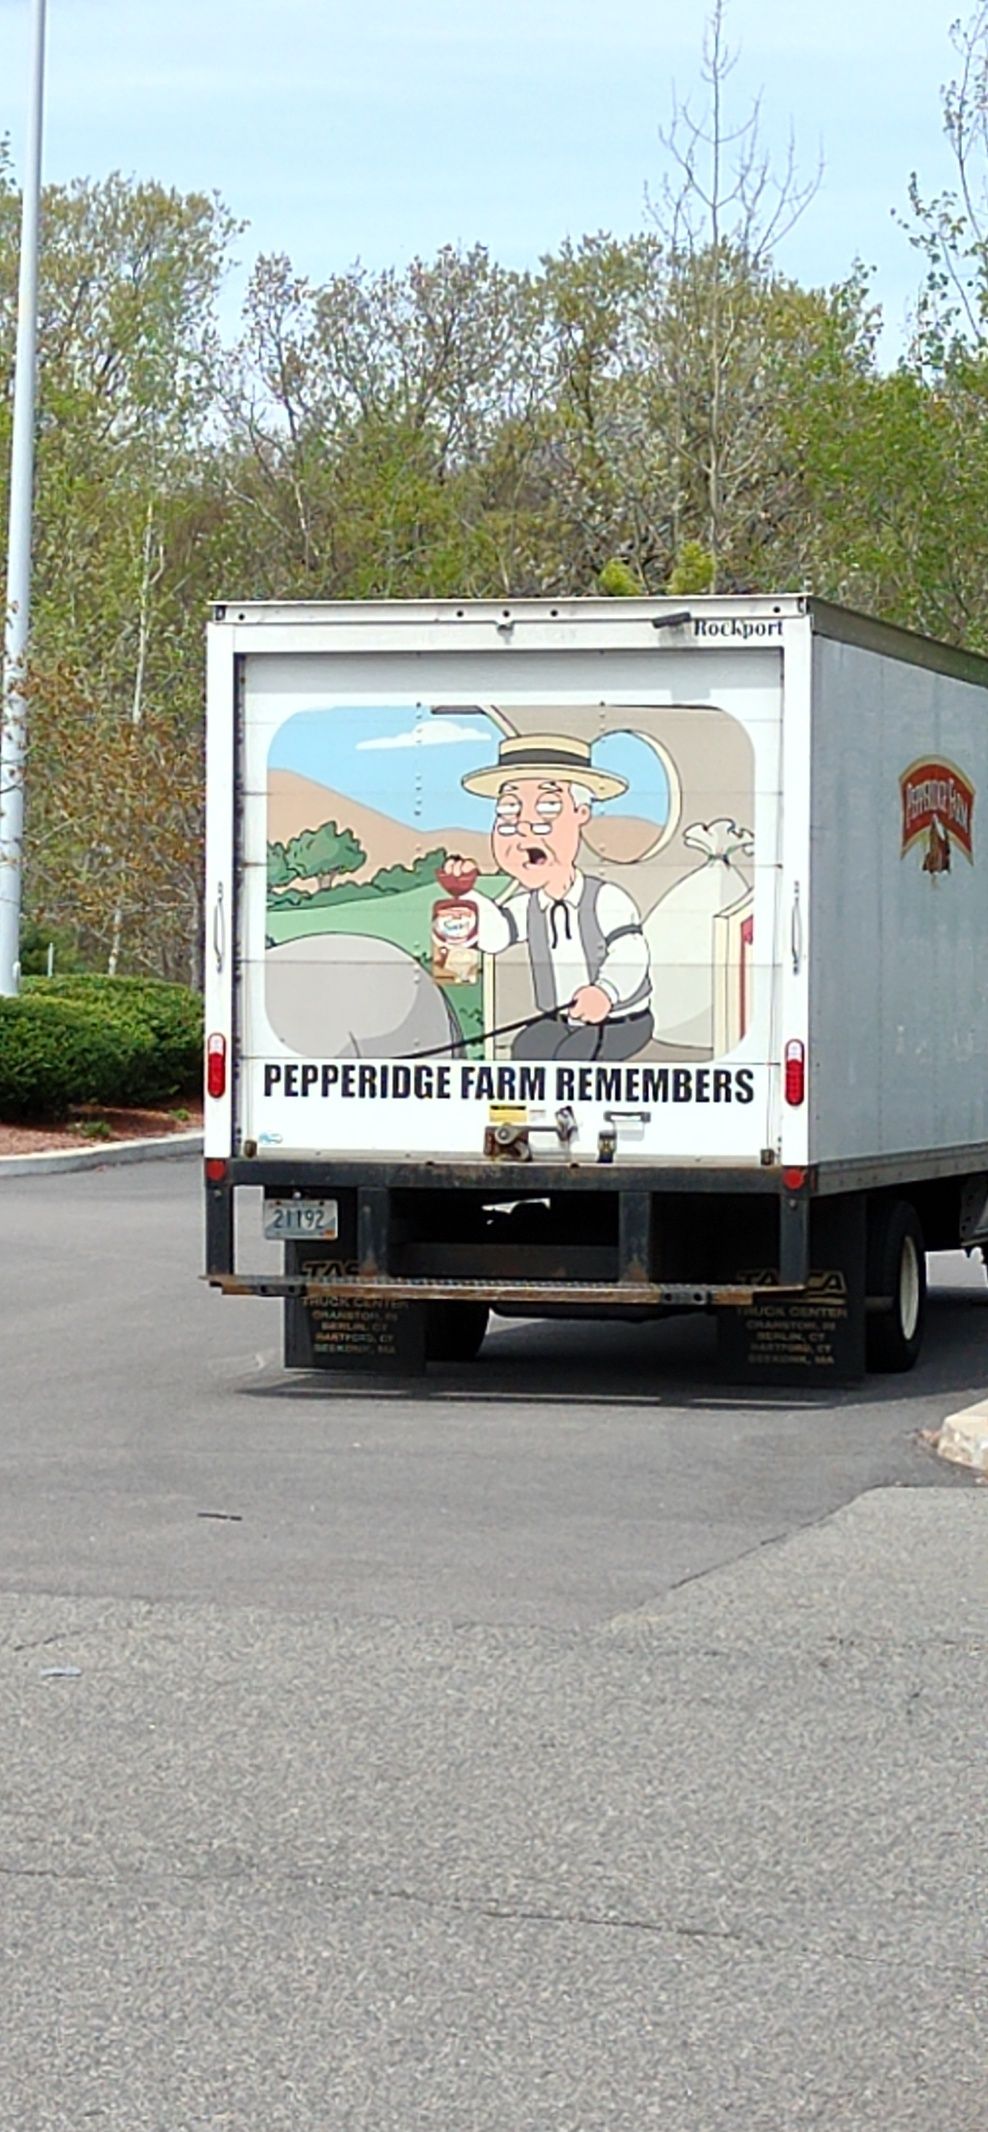 Pepperidge farms embracing it's family guy reference